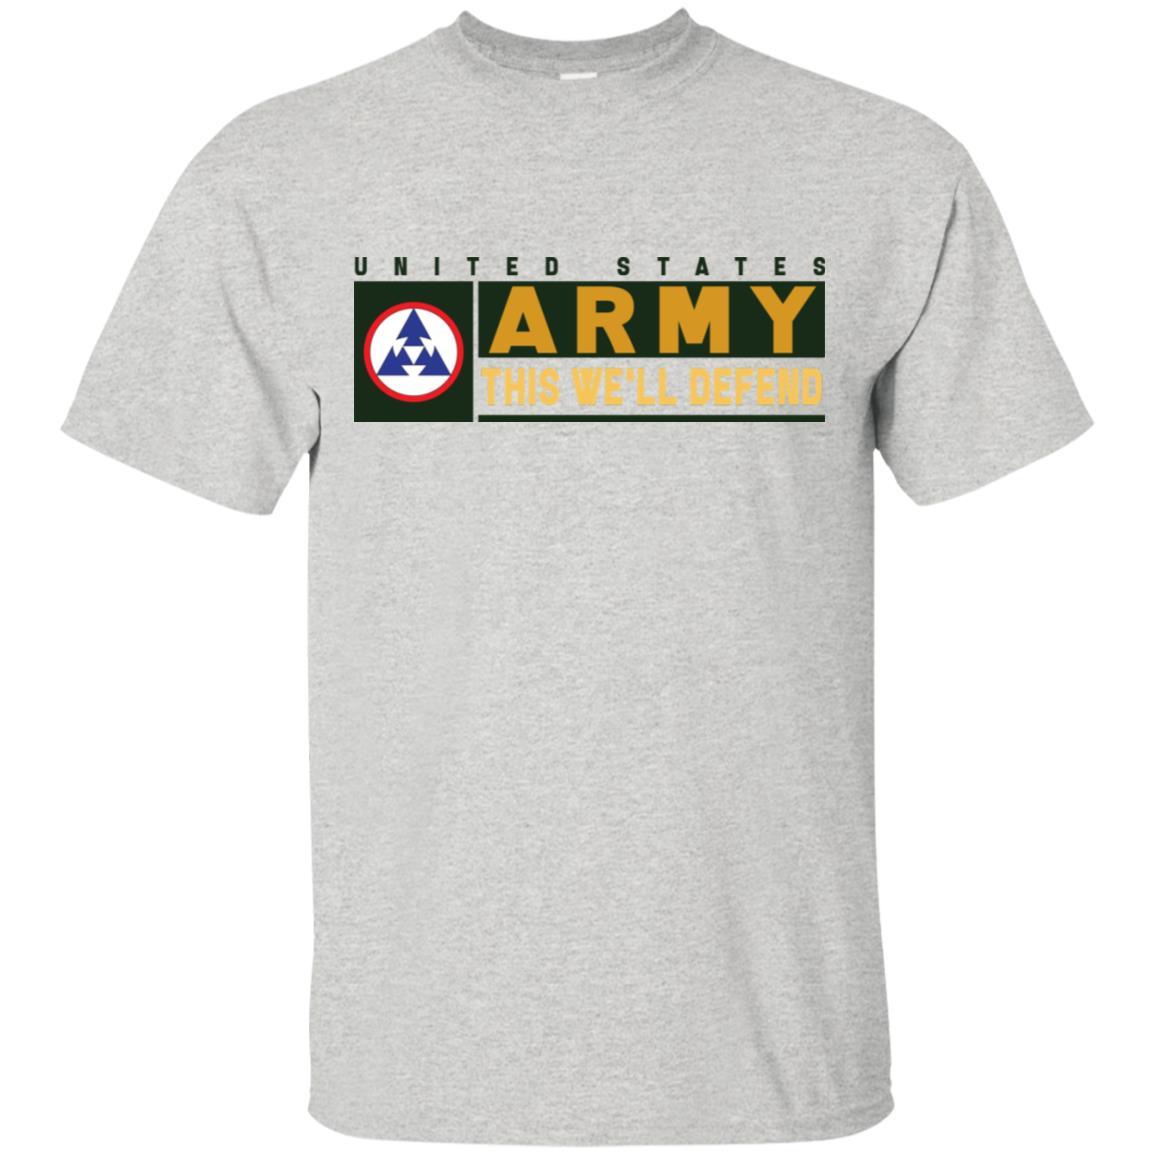 US Army 3RD SUSTAINMENT COMMAND- This We'll Defend T-Shirt On Front For Men-TShirt-Army-Veterans Nation